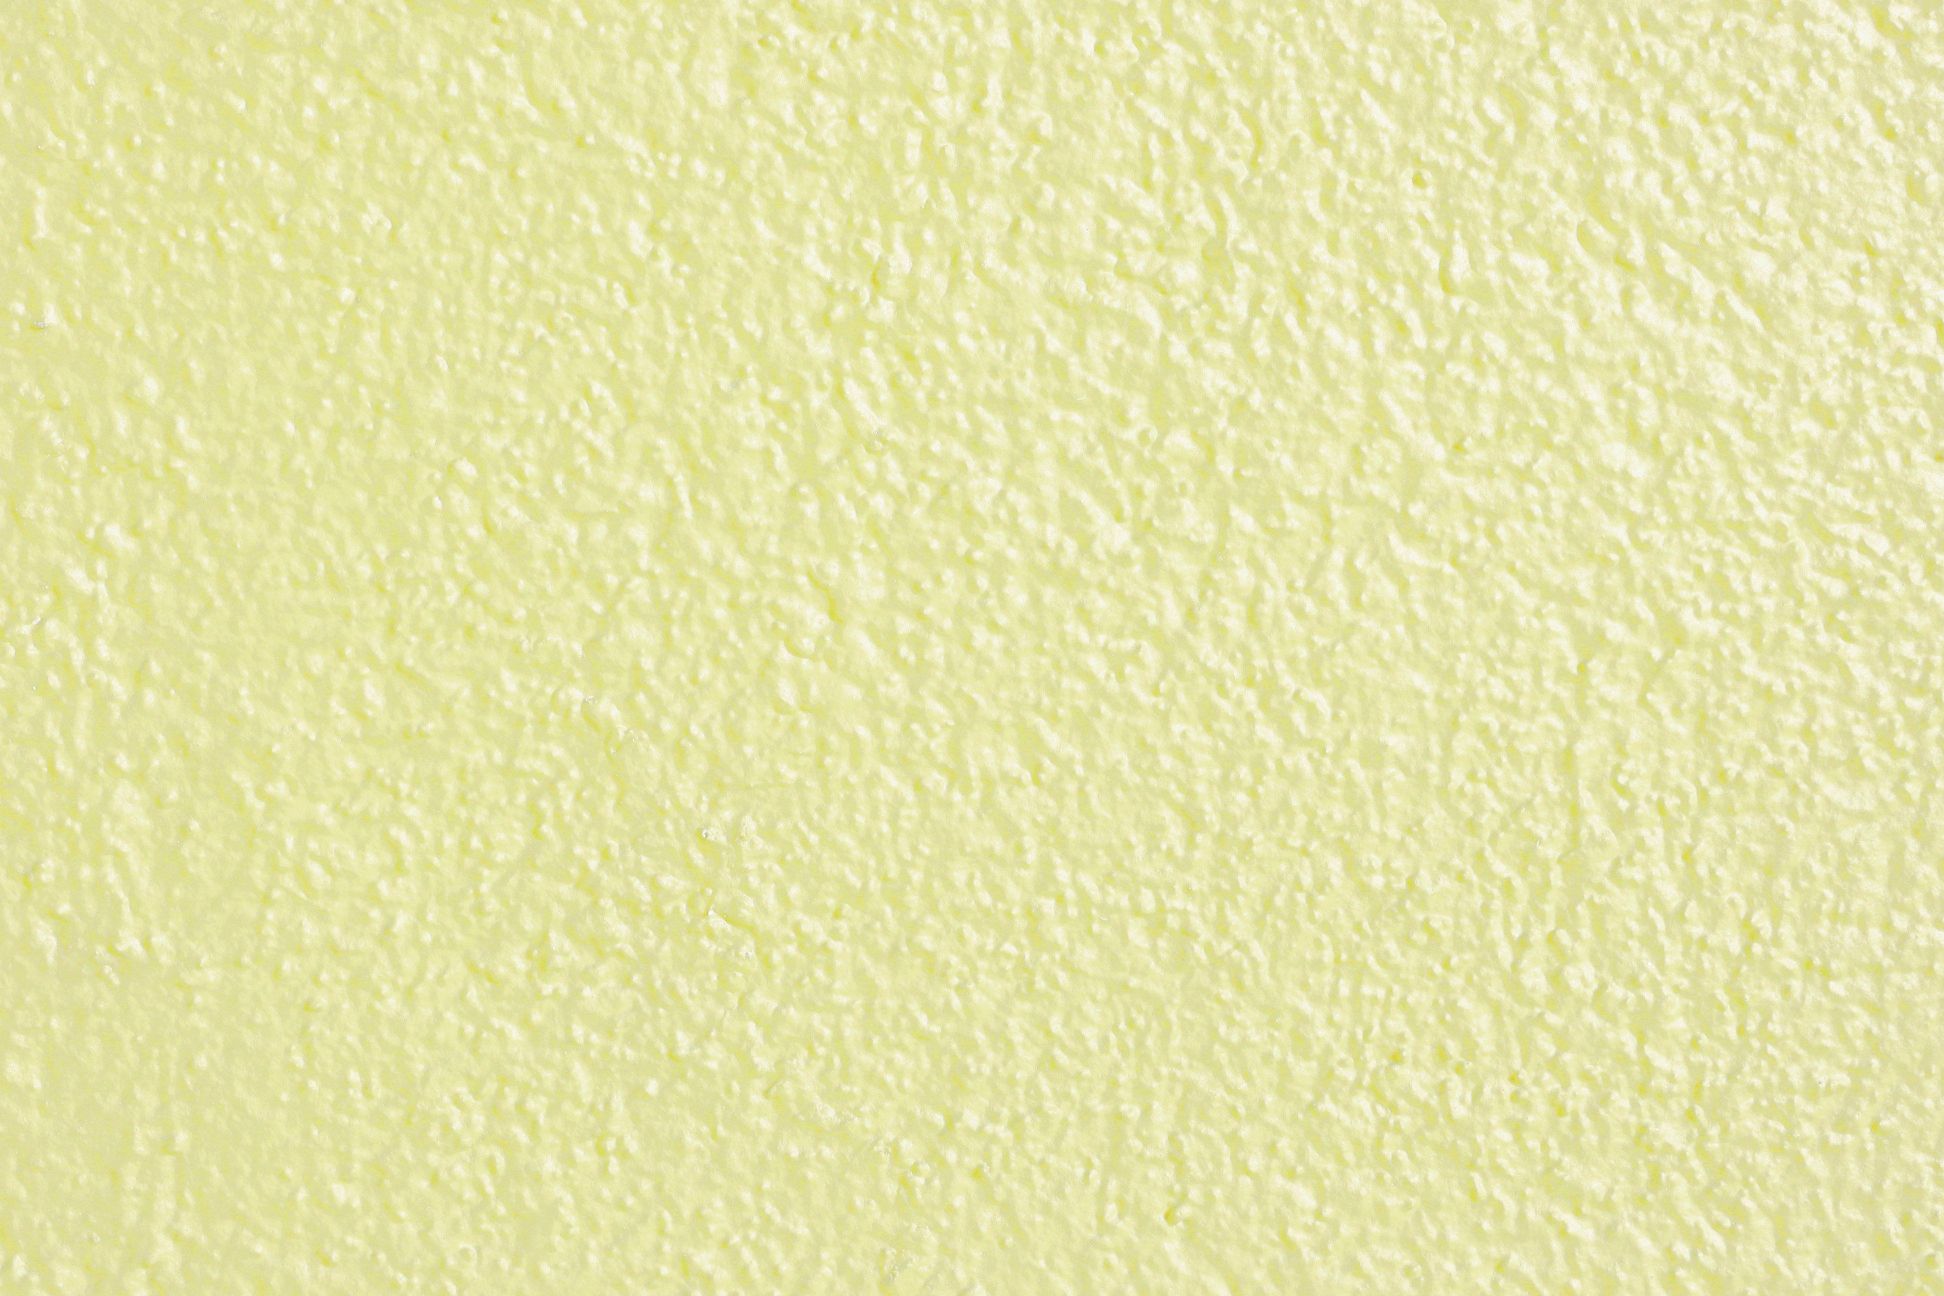 Stunning Pale Yellow Painted Wall Texture Photograph Photos Home Art ...